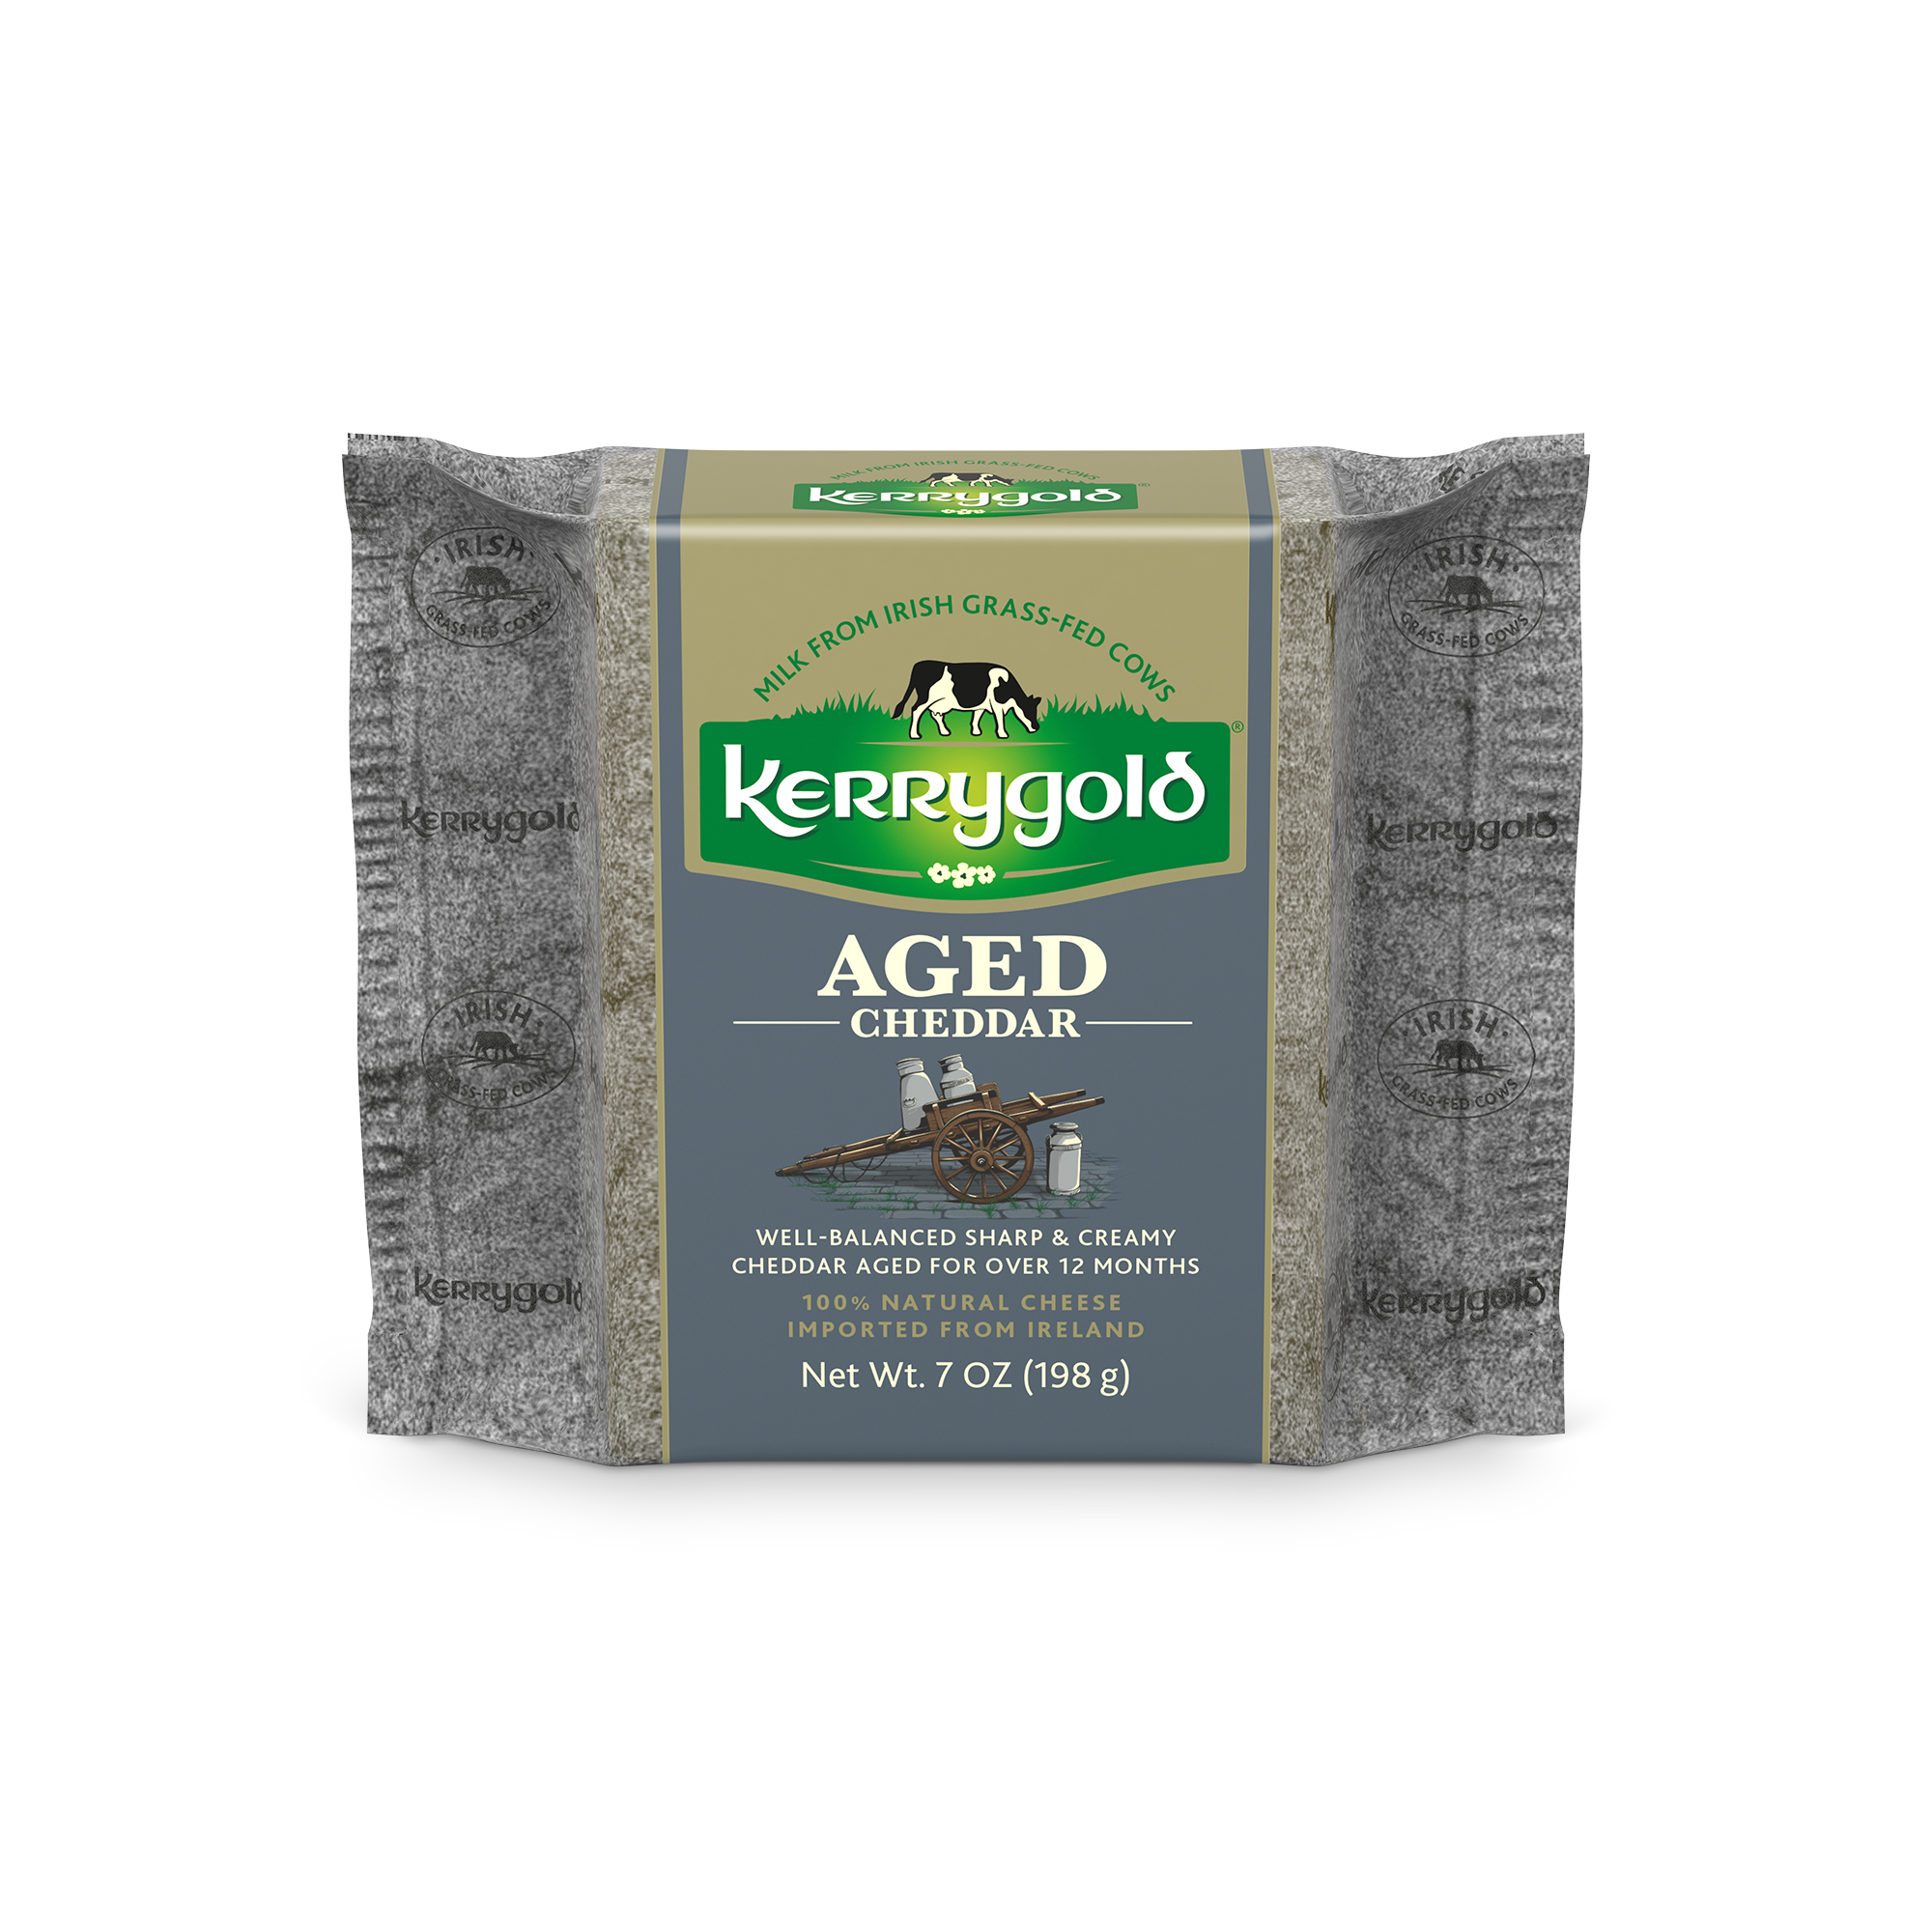 https://prodcdn1.kerrygoldusa.com/wp-content/uploads/2017/09/Aged-Cheddar_FRONT.png